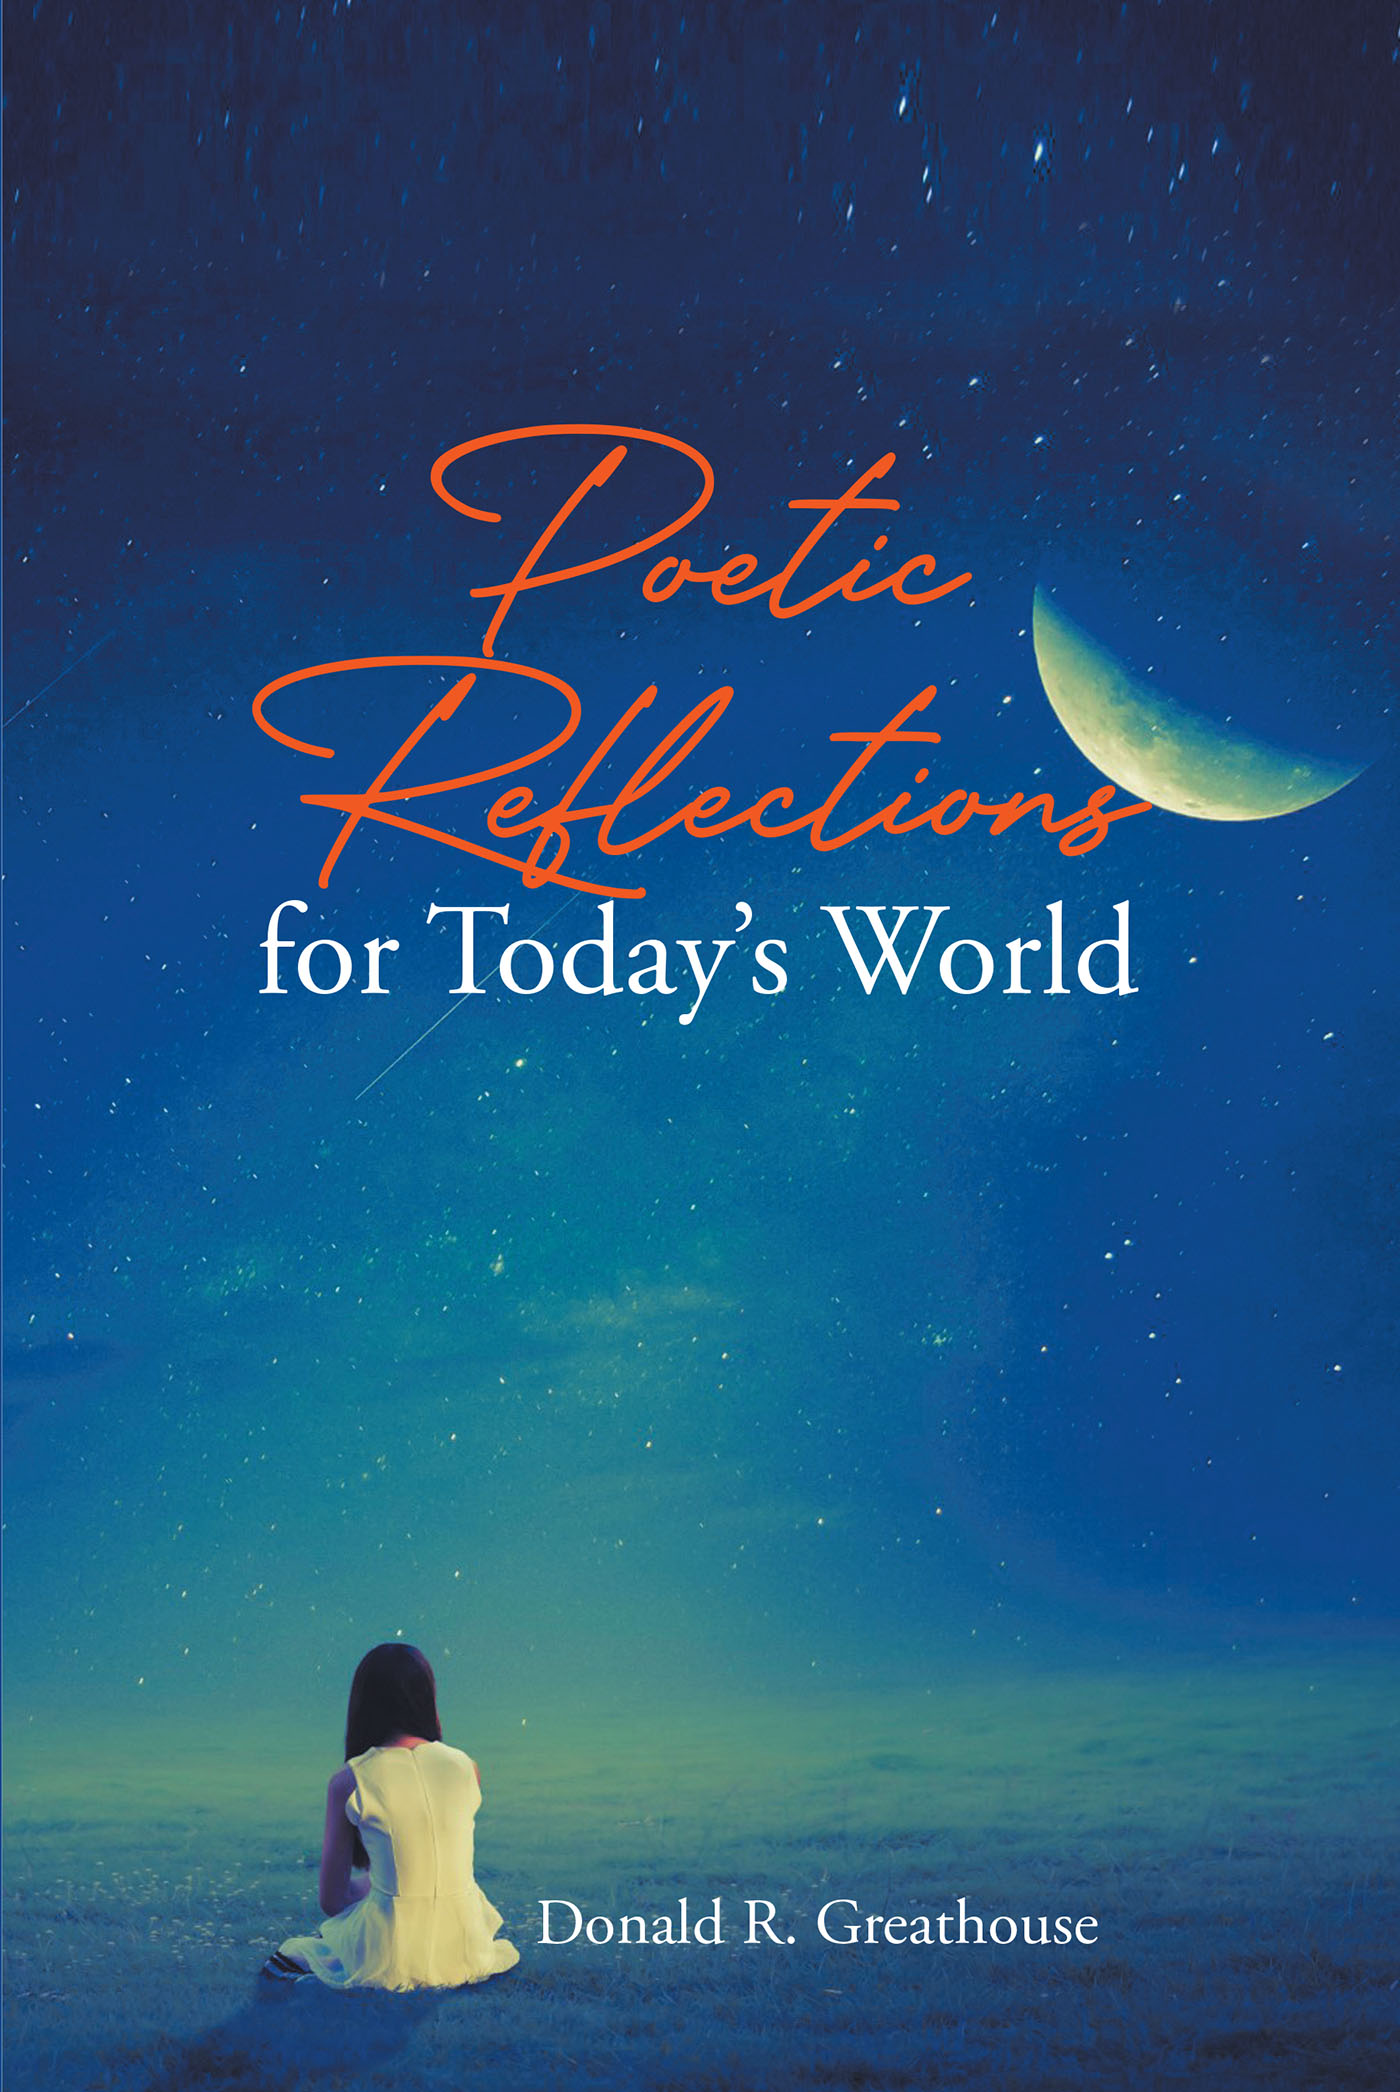 Donald R. Greathouse’s Newly Released "Poetic Reflections for Today’s World" is a Vibrant Arrangement of Varied Themes That Will Entertain and Inspire